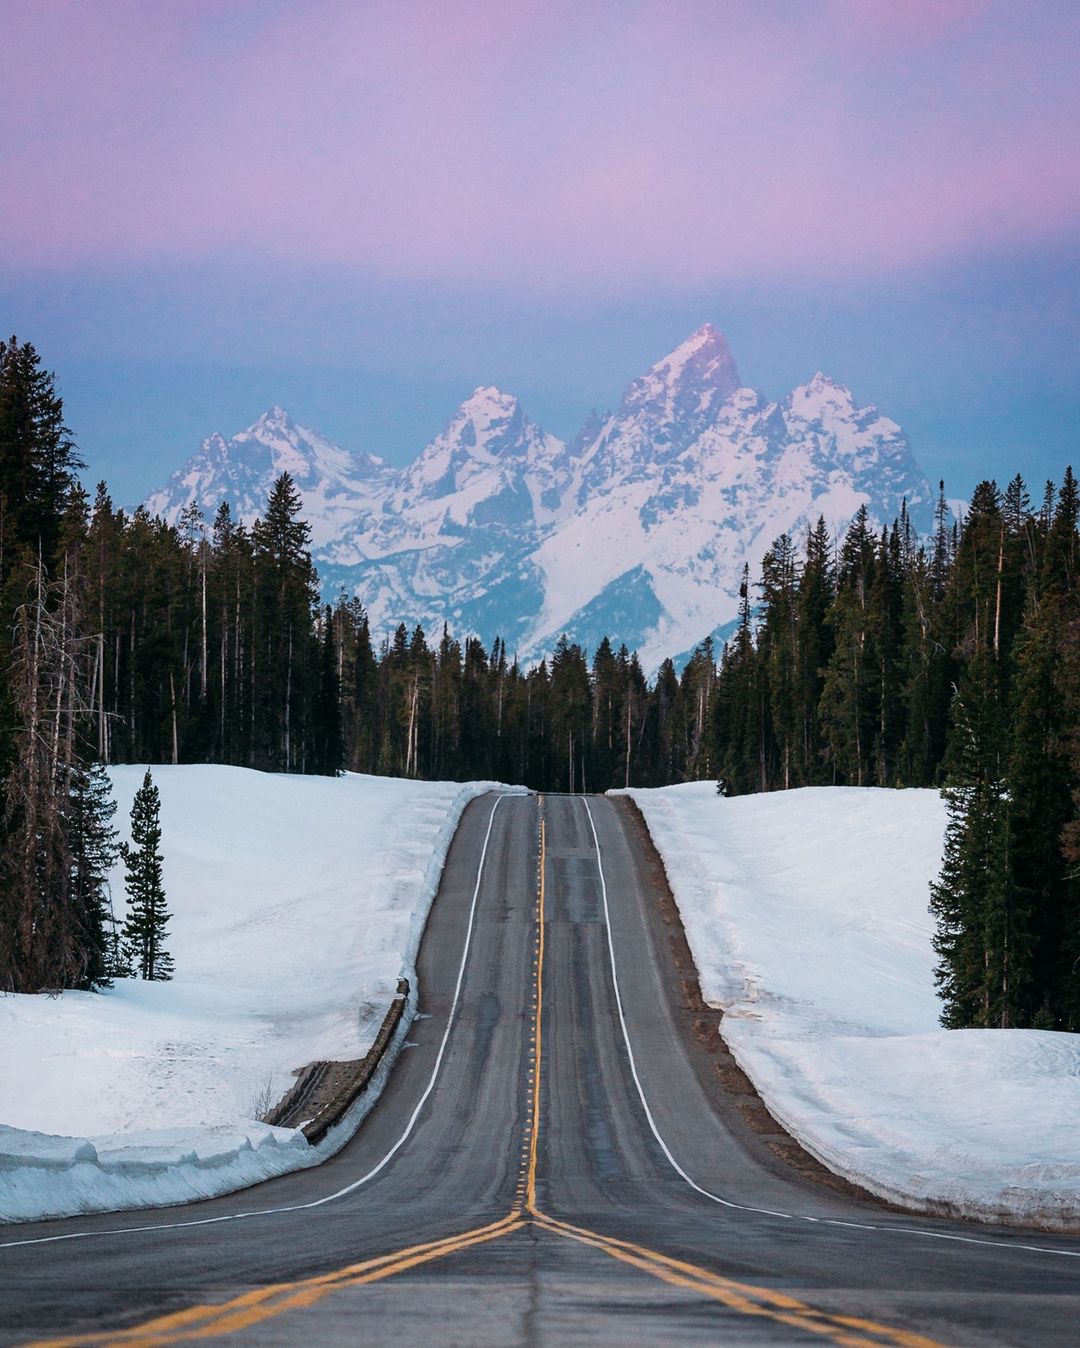 View Looking Down a Main Road toward the Mountains in Jackson Hole, WY. Photo by Instagram user @androsbeachclubtravel